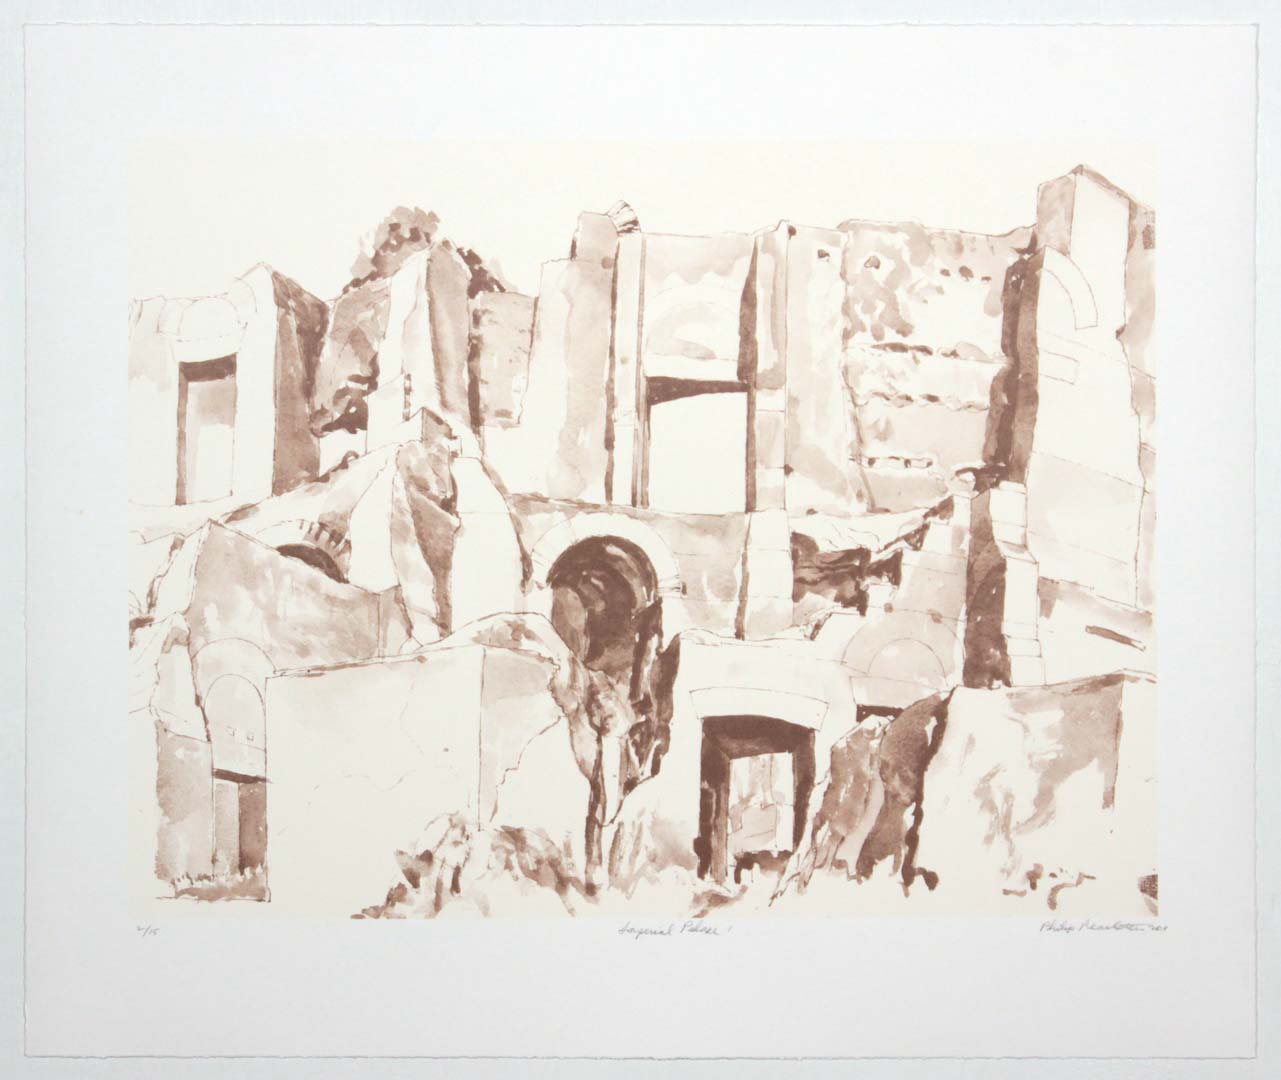 2011 Imperial Palace #1 Lithograph on Paper 20.625 x 24.625